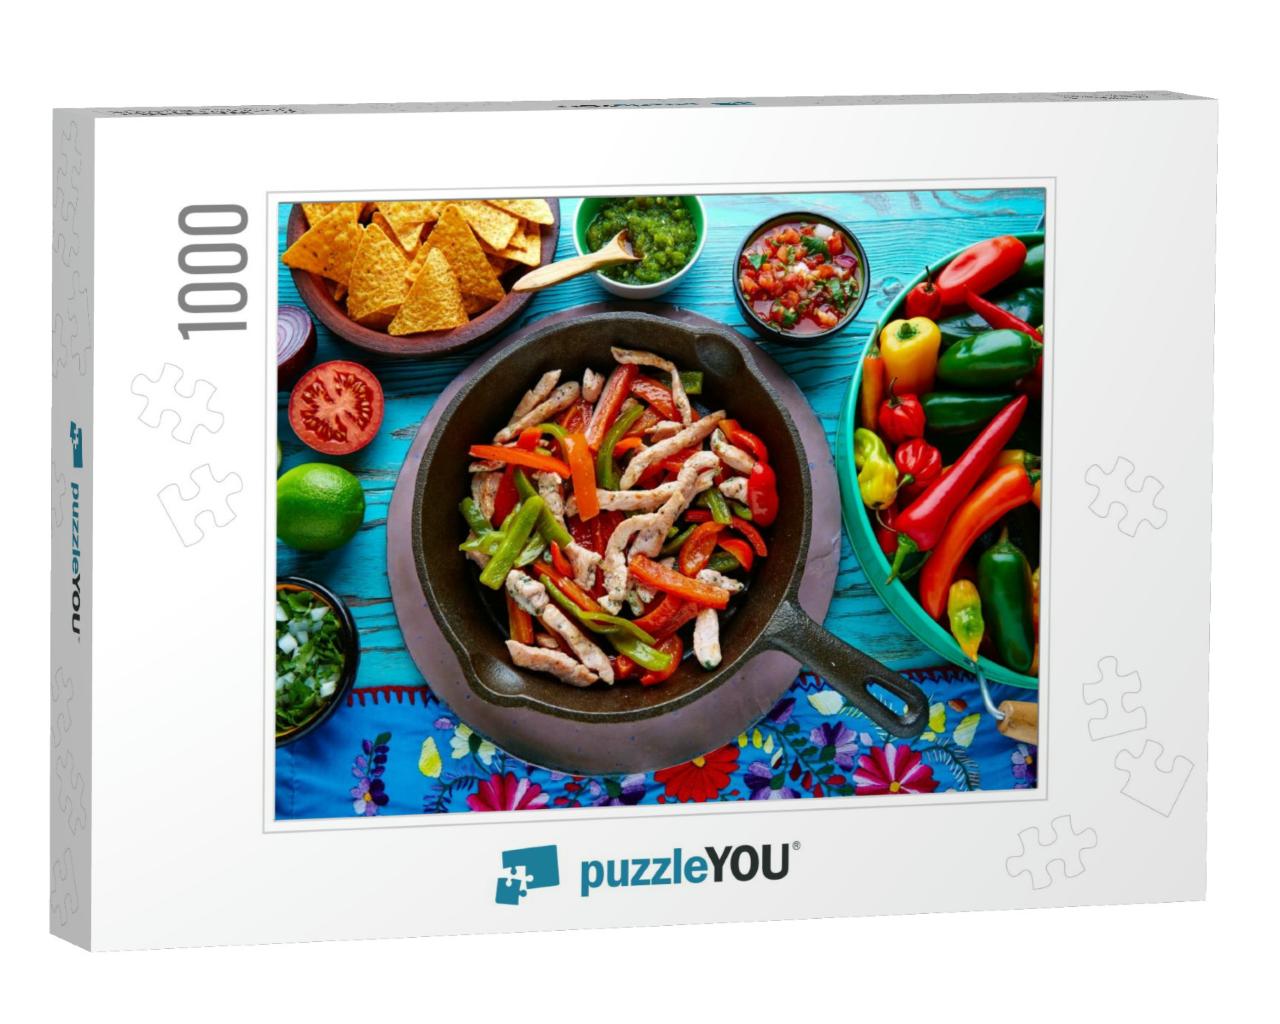 Chicken Fajitas in a Pan with Sauces Chili & Sides Mexica... Jigsaw Puzzle with 1000 pieces